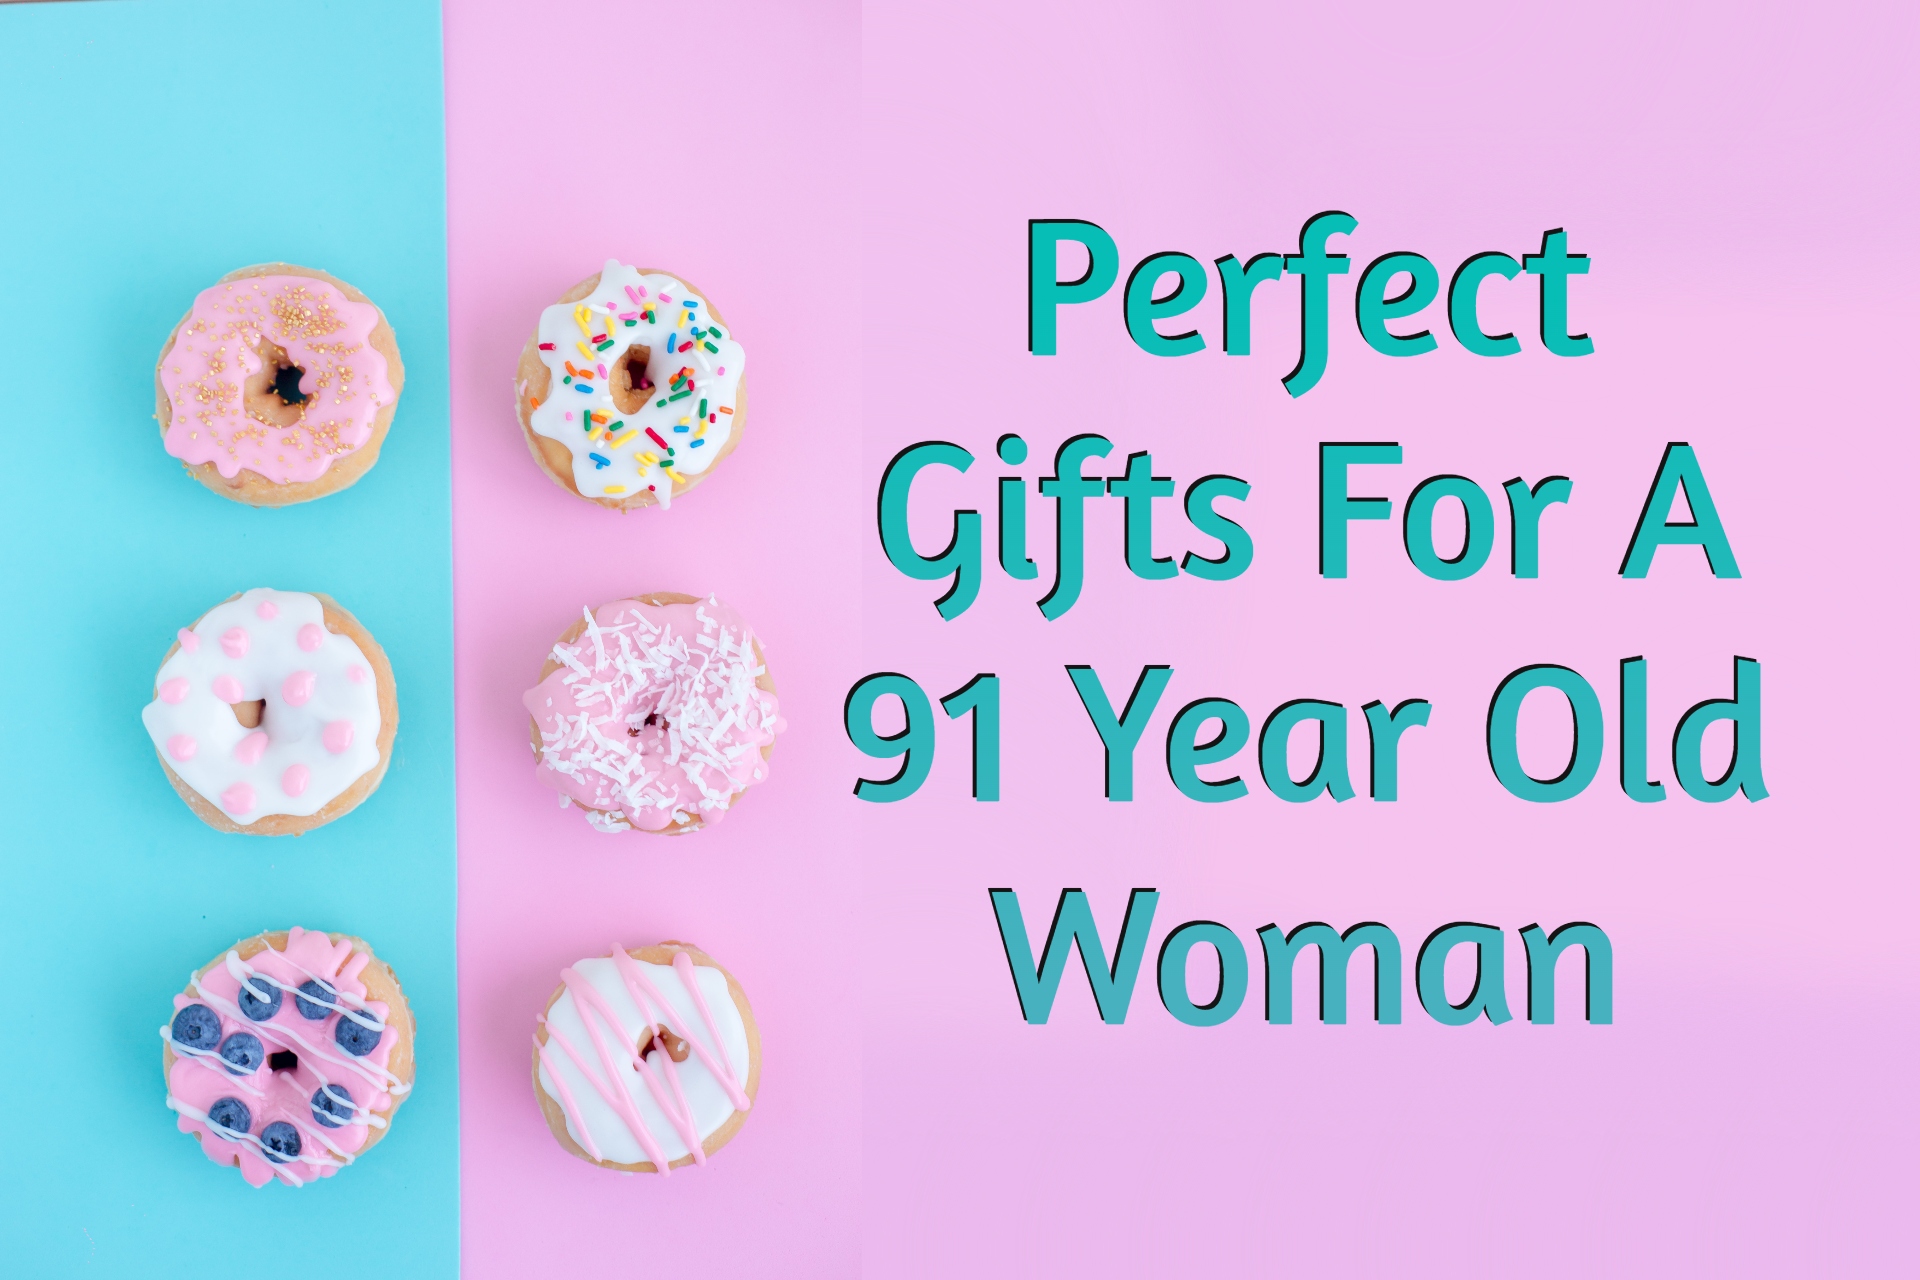 Cover image of gift ideas for 91-year-old woman by Giftsedge